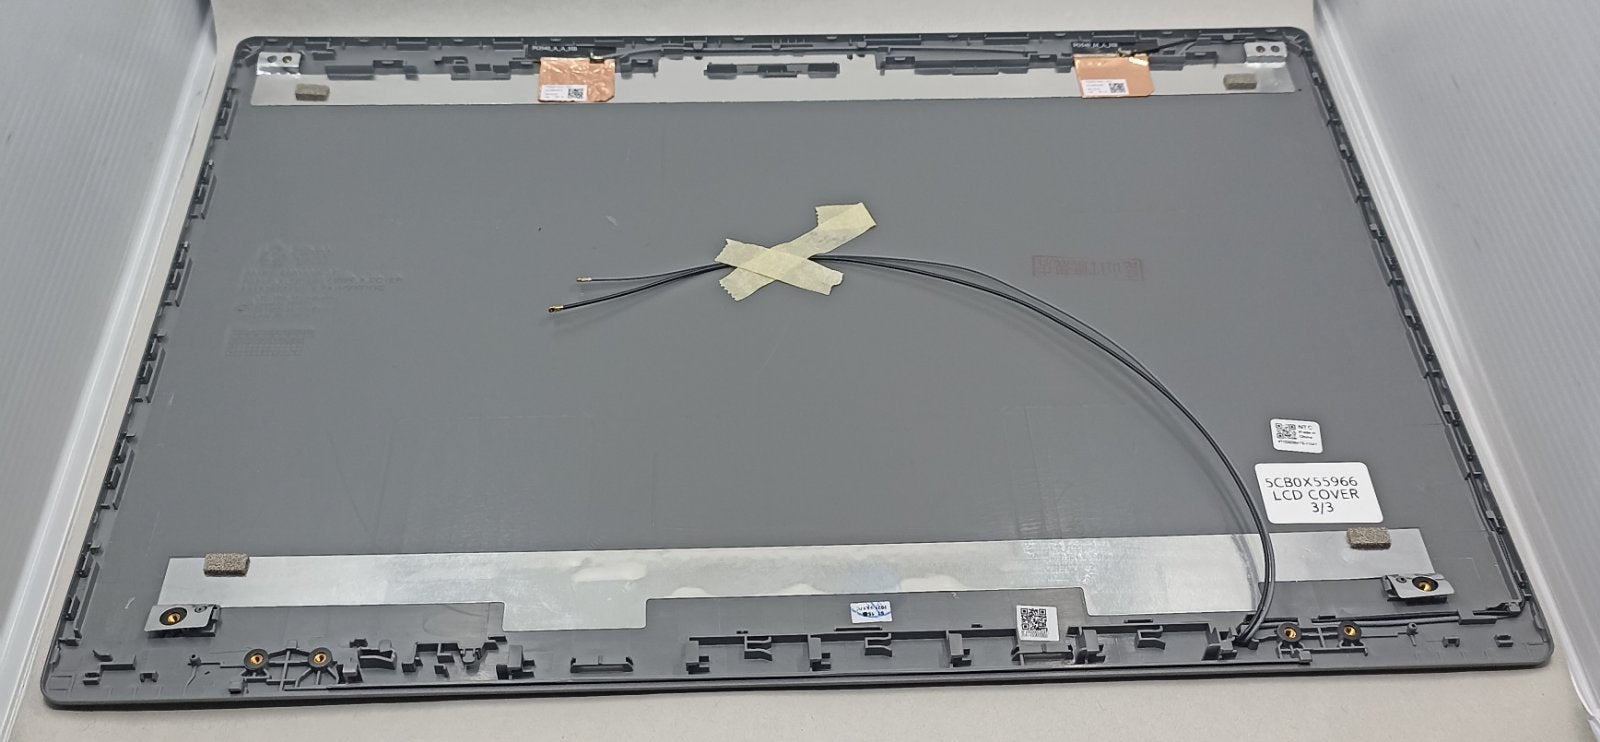 Replacement LCD Cover For Lenovo L3-15IML05 WL